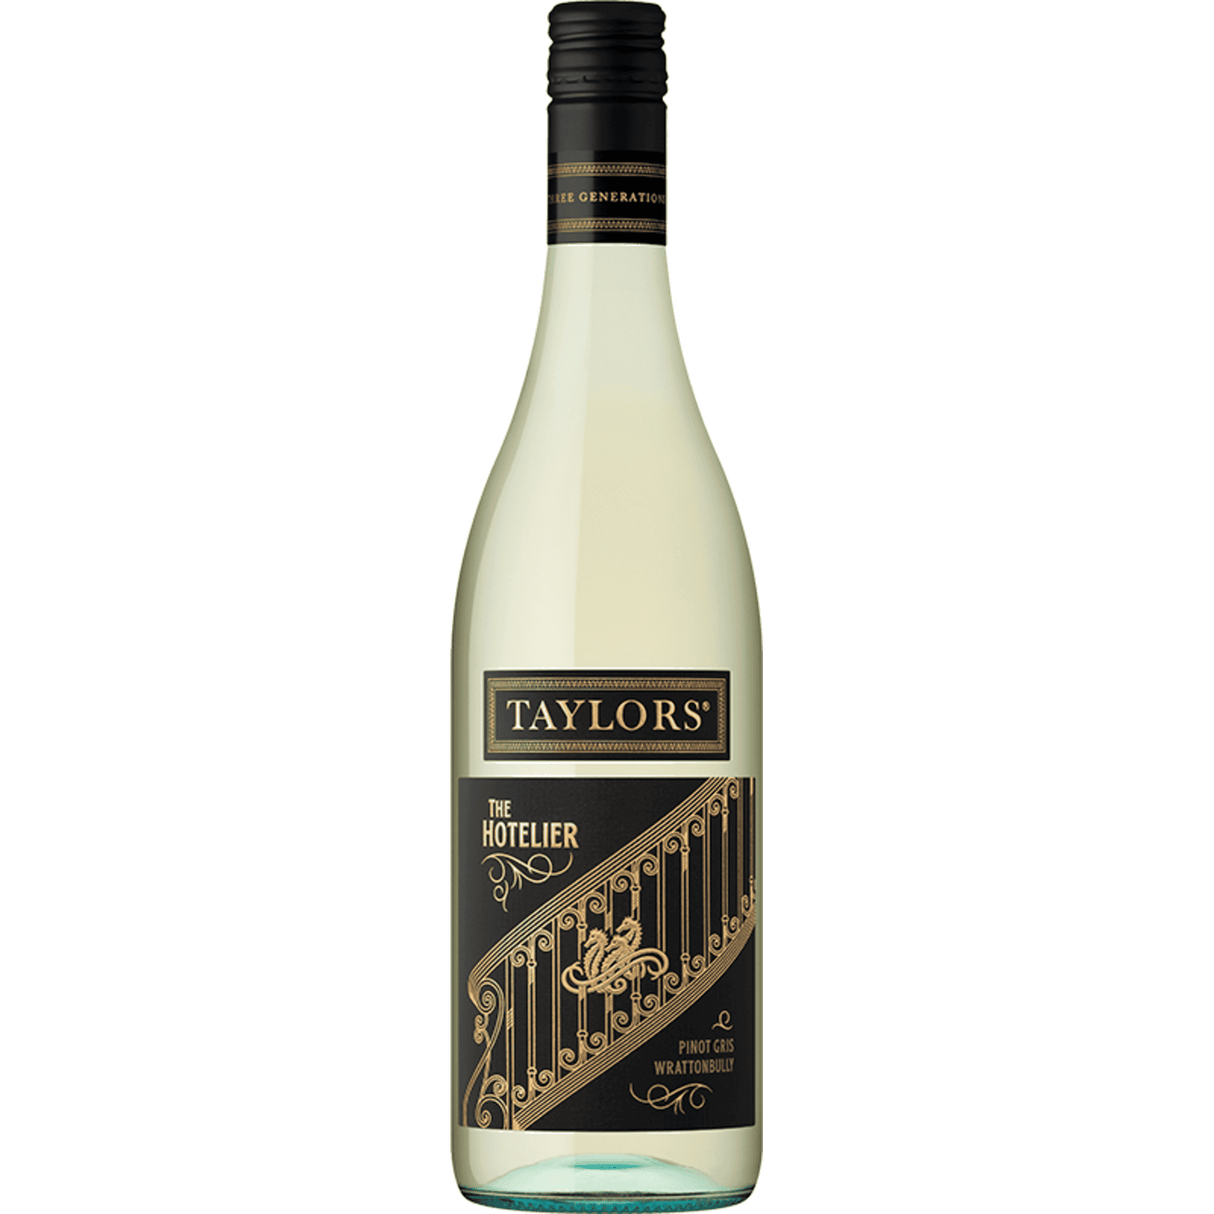 Taylors Hotelier Pinot Gris 750ml